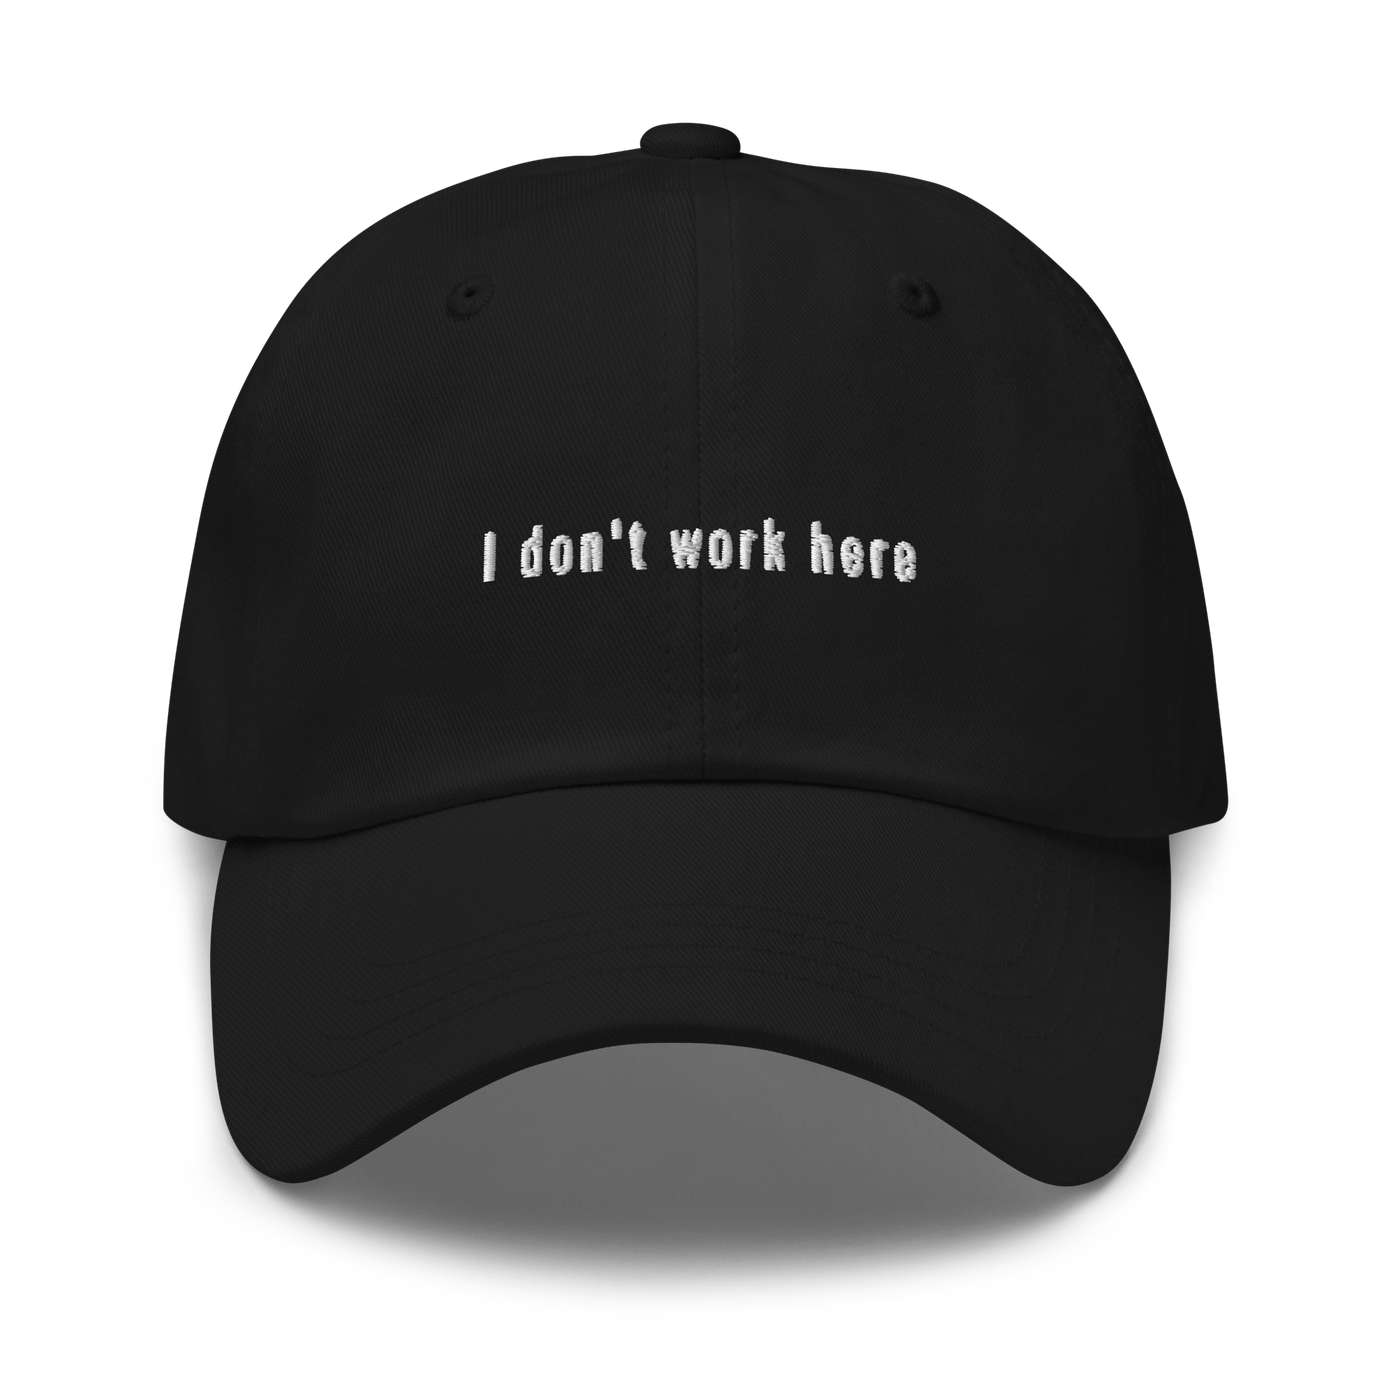 I don't work here Dad hat - Black - - Just Another Cap Store